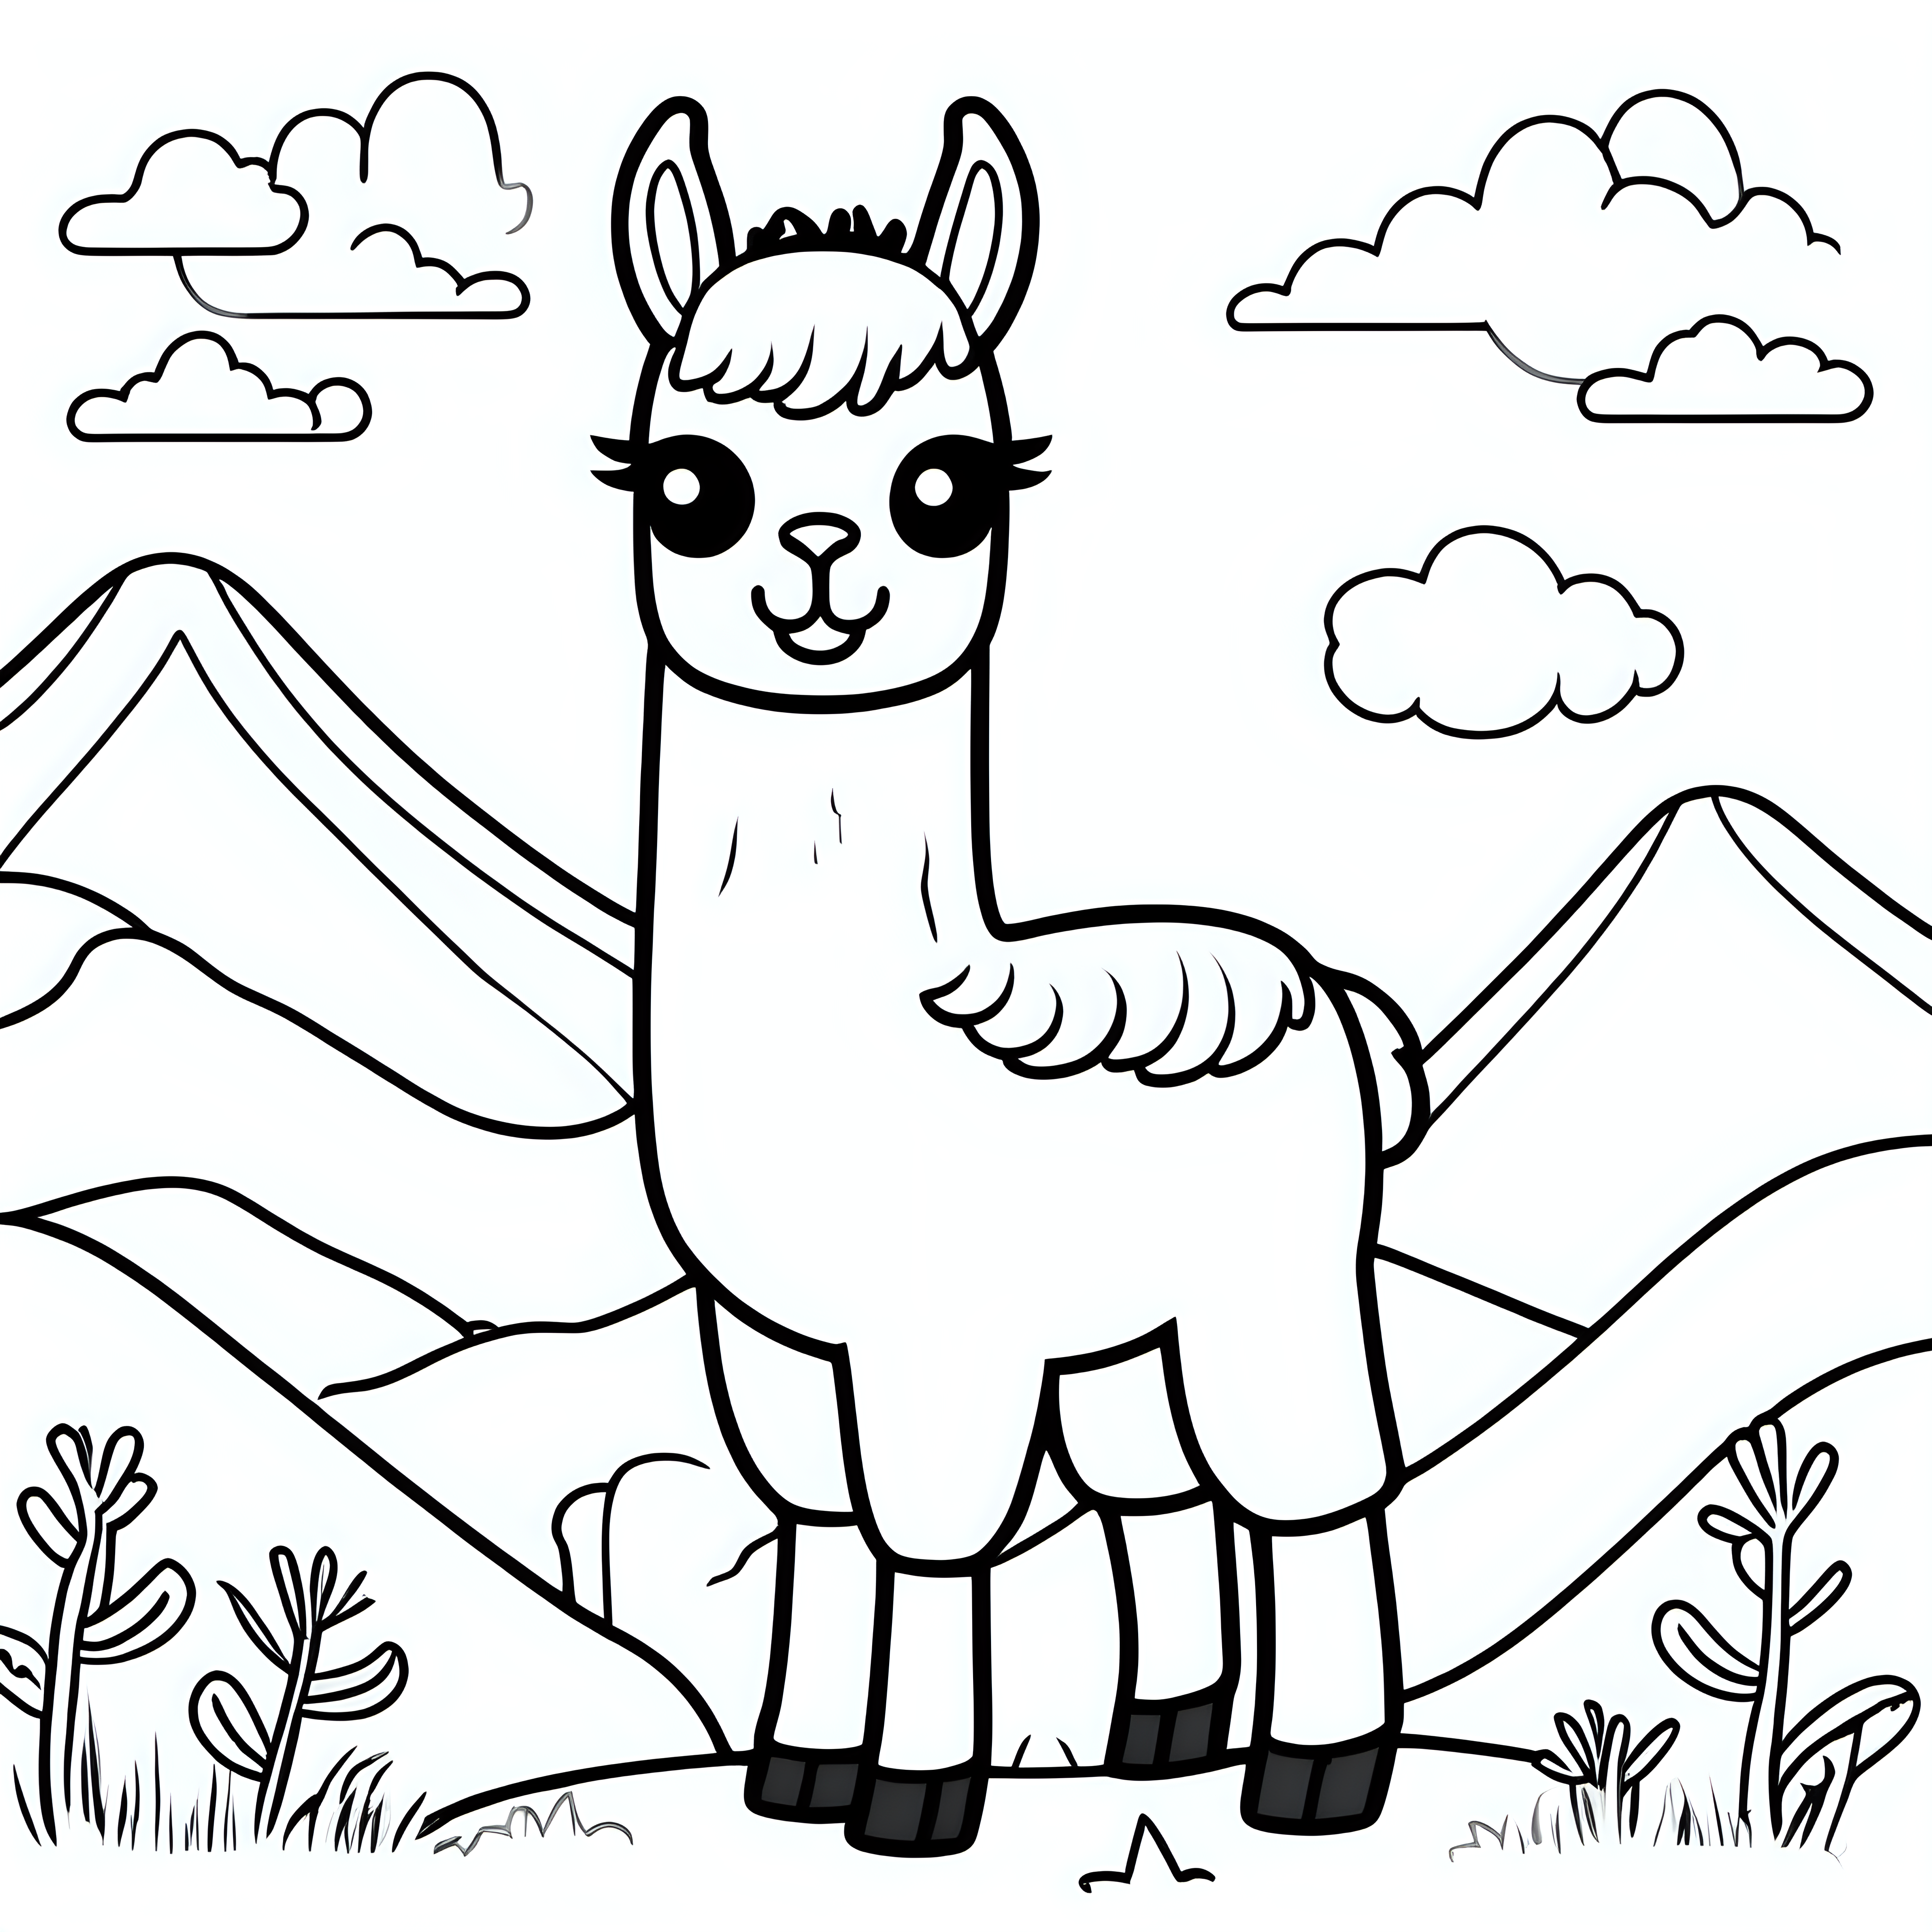 draw a cute Llama with only the outline in black for a coloring book for kids